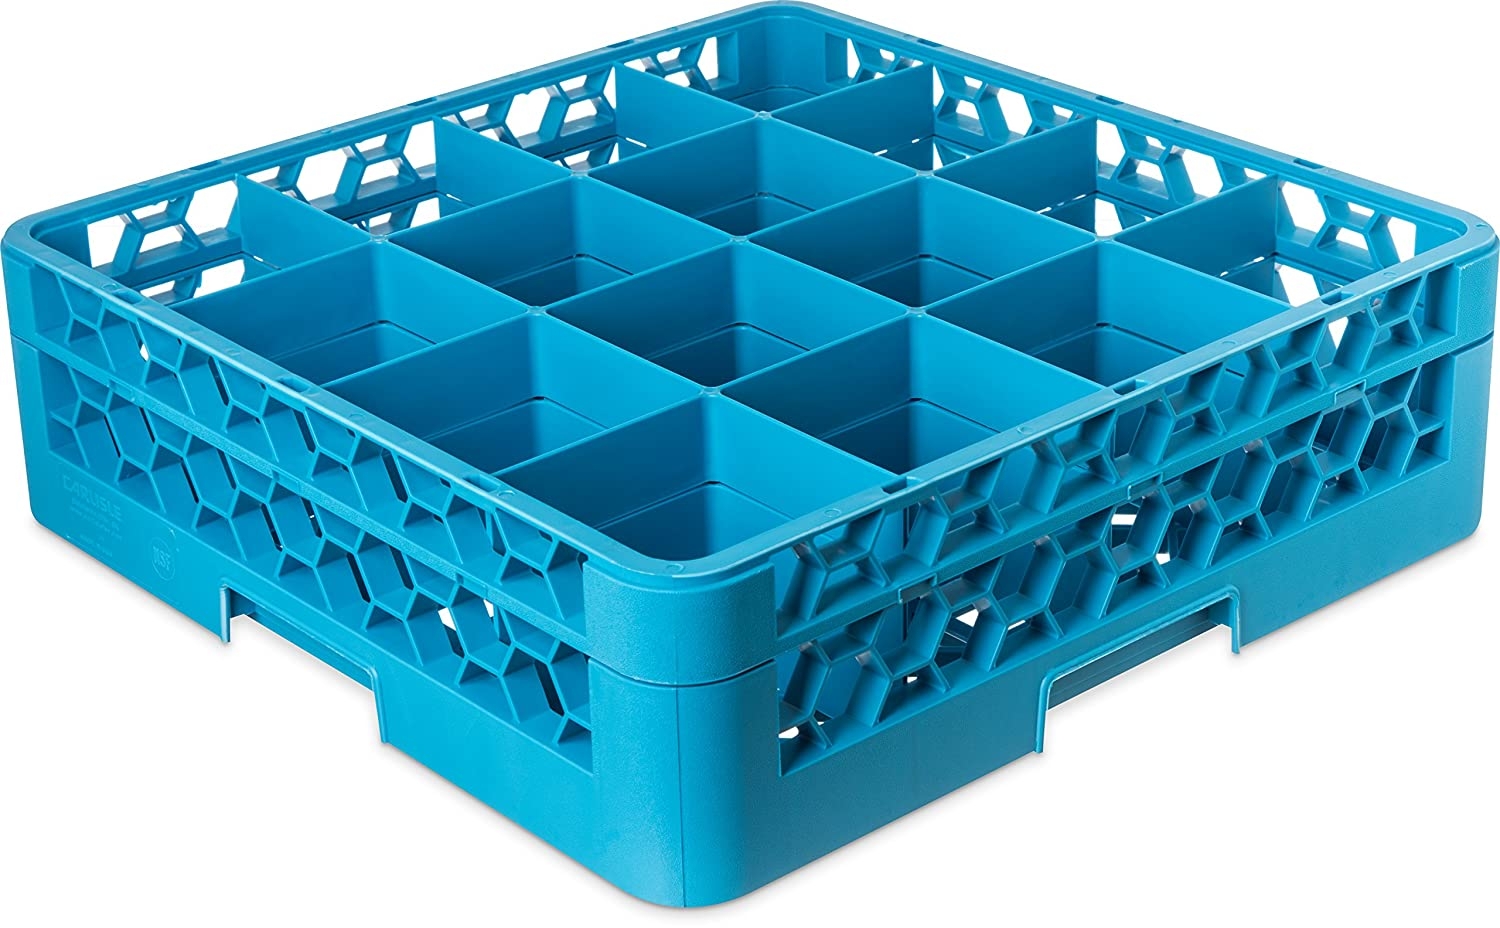 CFS RG9-114 OptiClean 9 Compartment Glass Rack with 1 Extender, 5-13/16″ Compartments, Blue (Pack of 4) Import To Shop ×Product